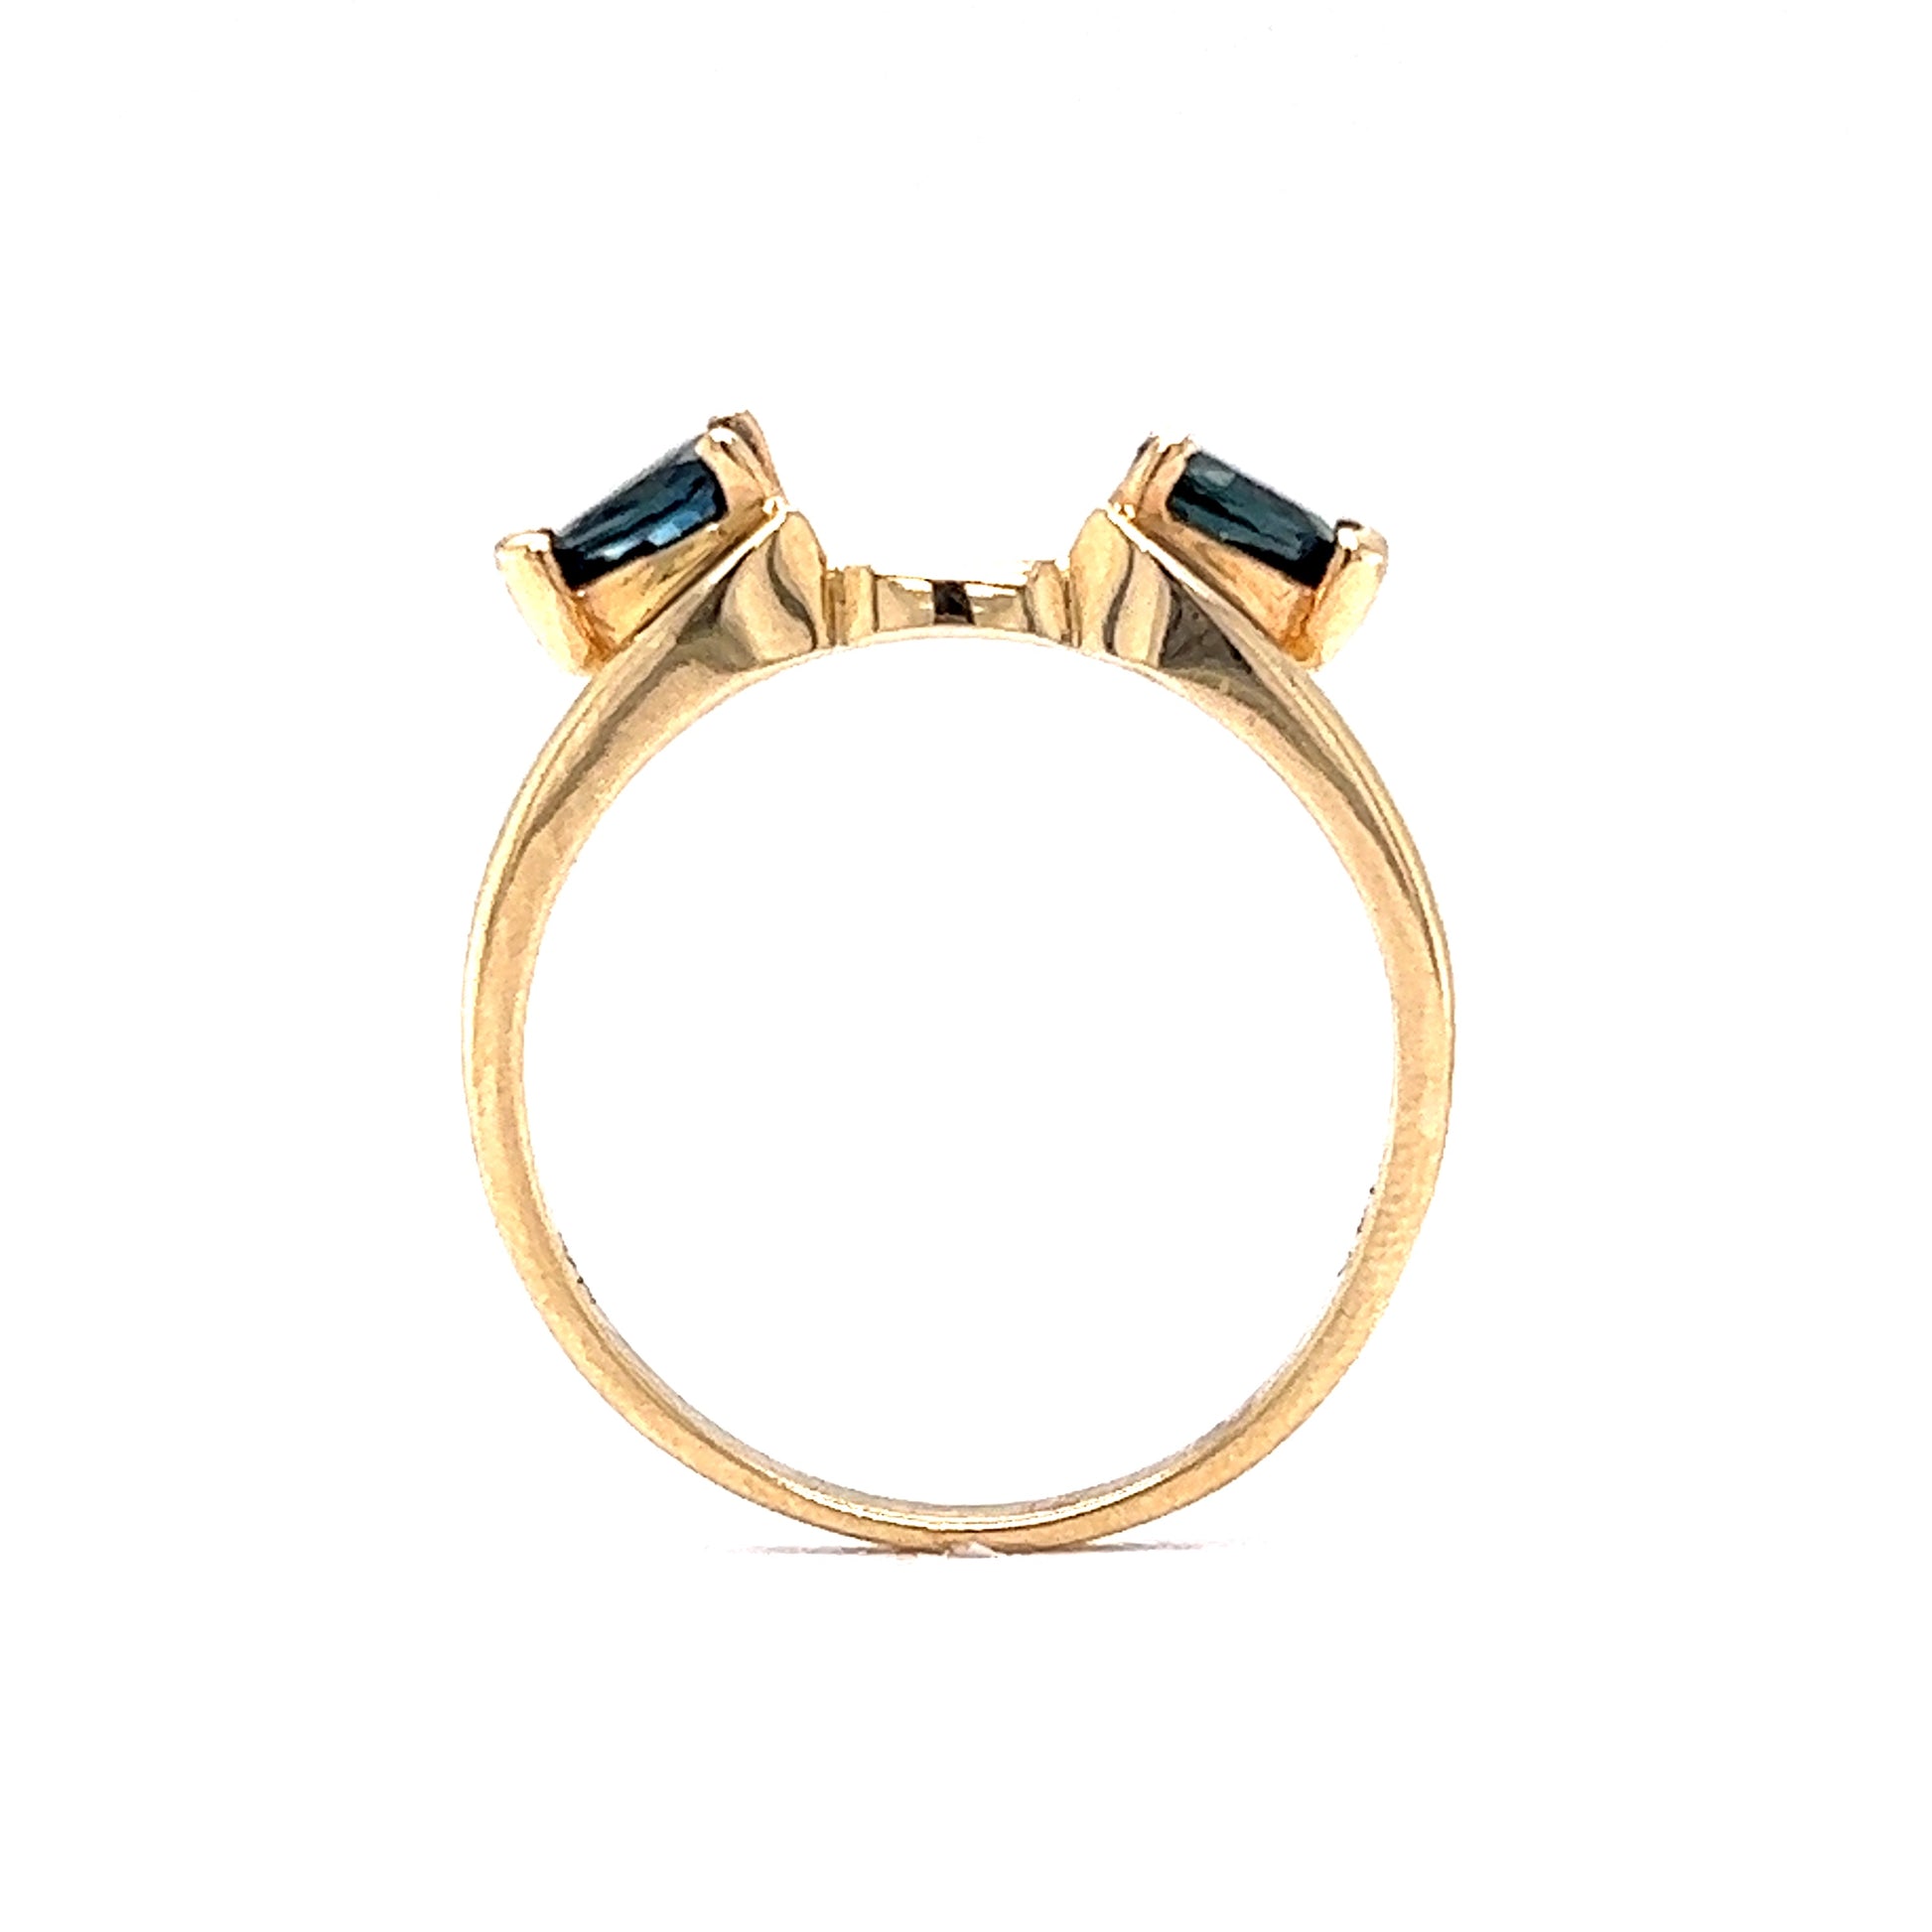 Sapphire Ring Guard Wedding Band in 14k Yellow GoldComposition: 14 Karat Yellow Gold Ring Size: 7 Total Gram Weight: 2.4 g Inscription: 14k
      